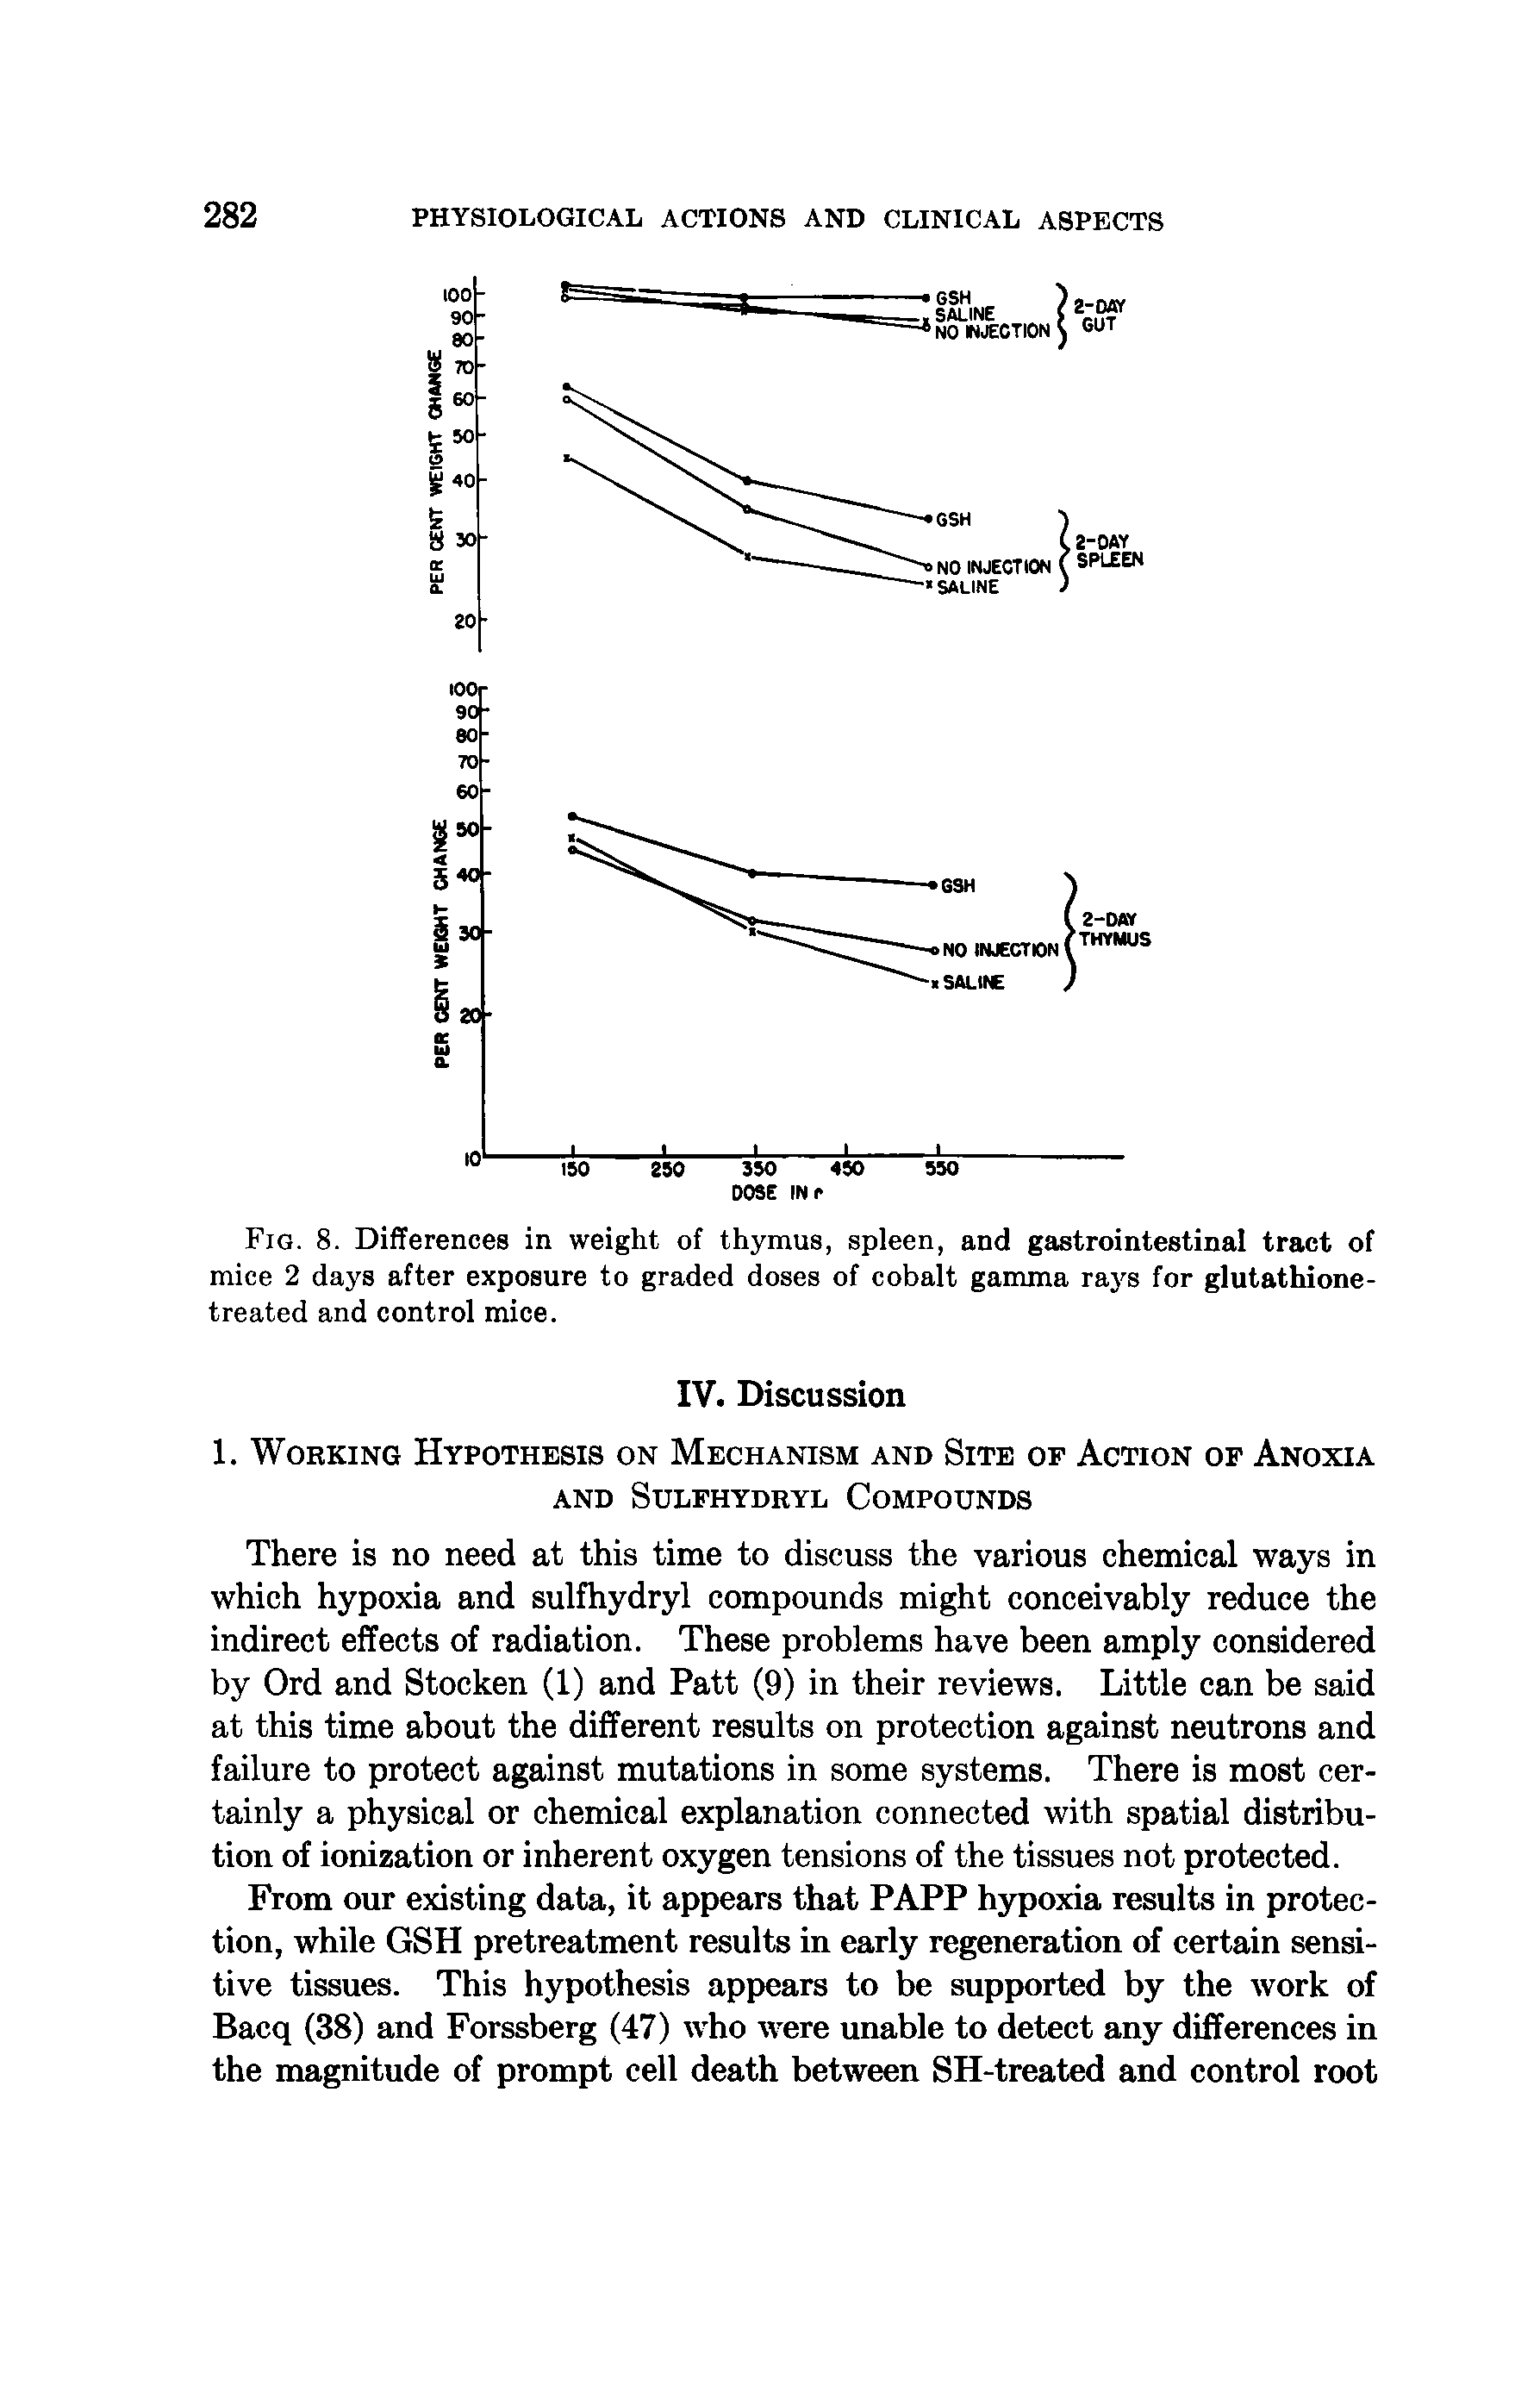 Fig. 8. Differences in weight of thymus, spleen, and gastrointestinal tract of mice 2 days after exposure to graded doses of cobalt gamma rays for glutathione-treated and control mice.